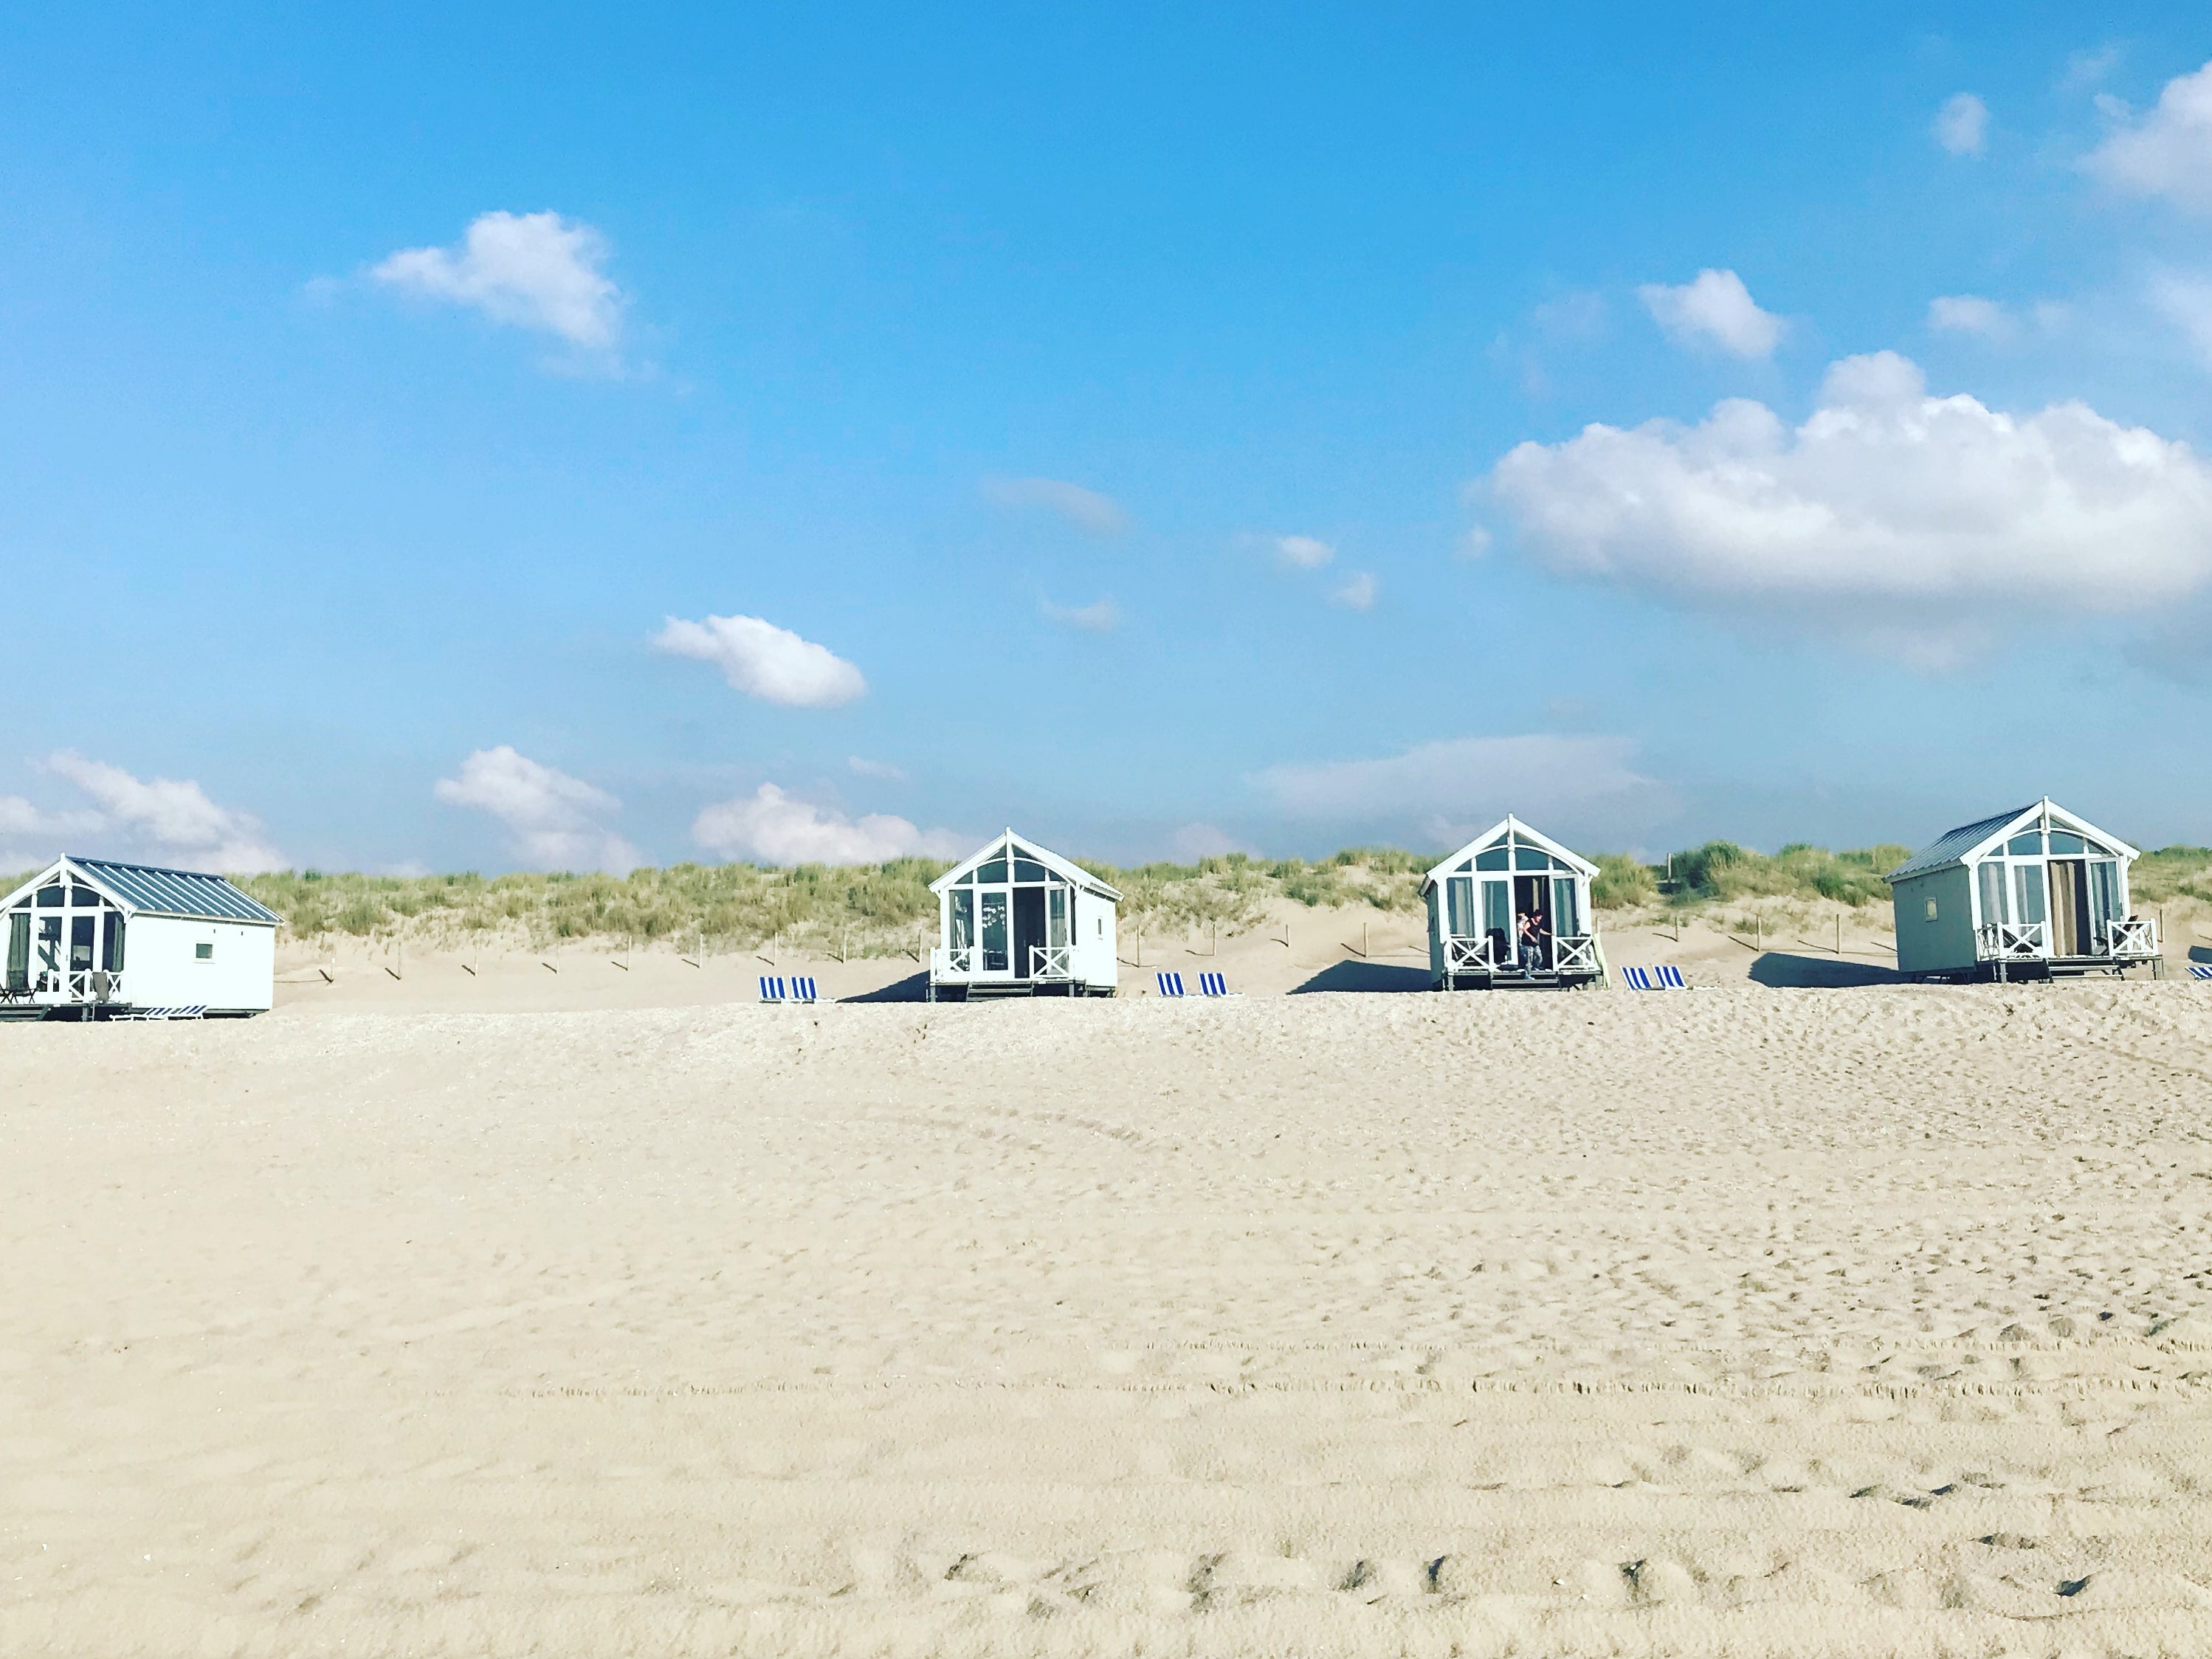 Haagse Strandhuisjes are contemporary wooden beach houses